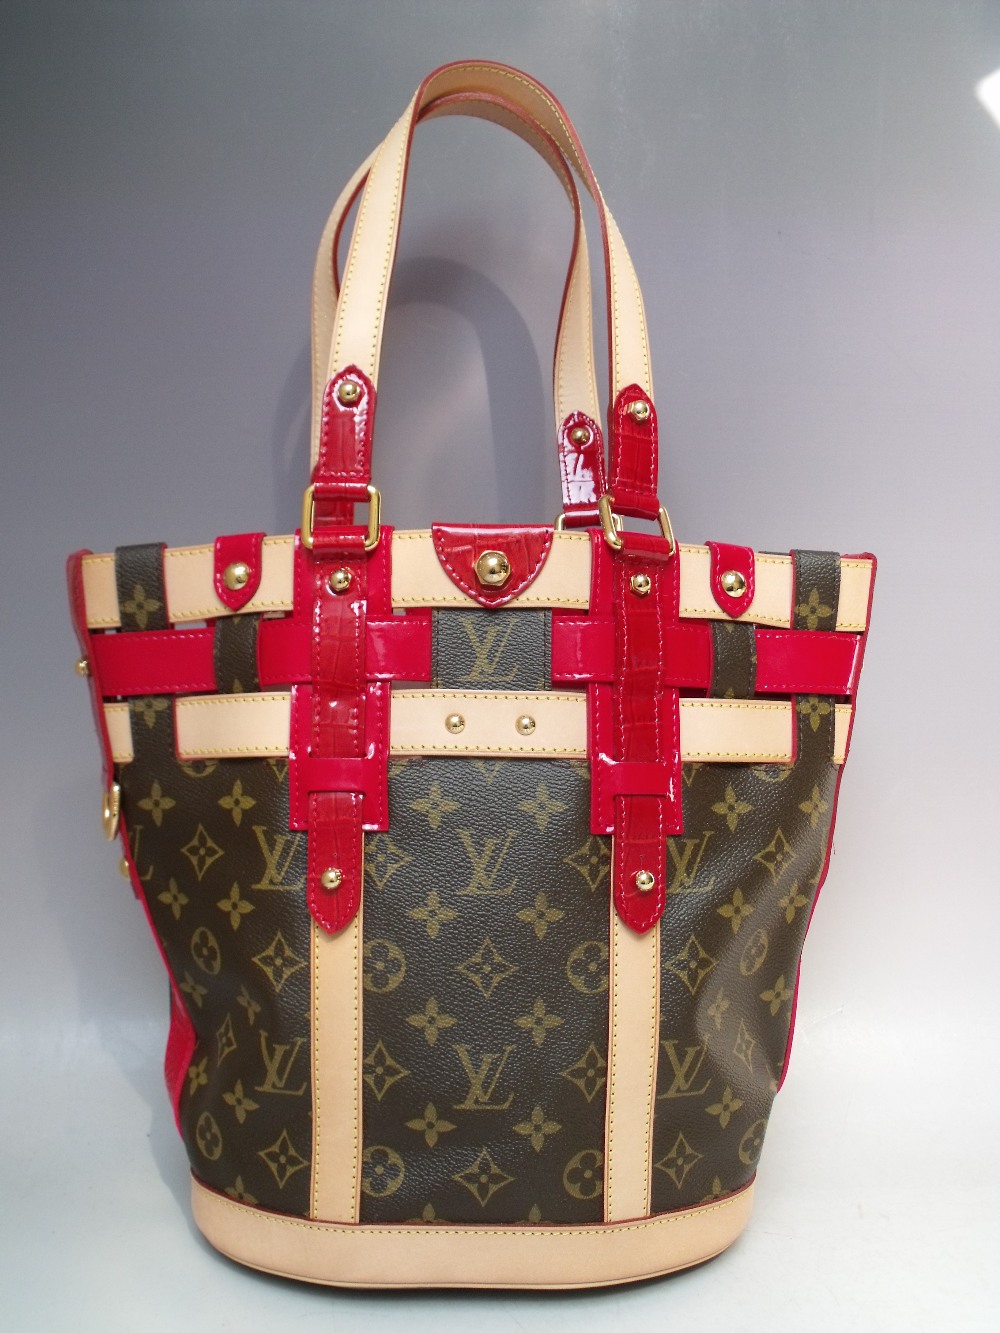 A LOUIS VUITTON RUBIS SALINA PM BAG, with double top handles, natural leather trim and red patent